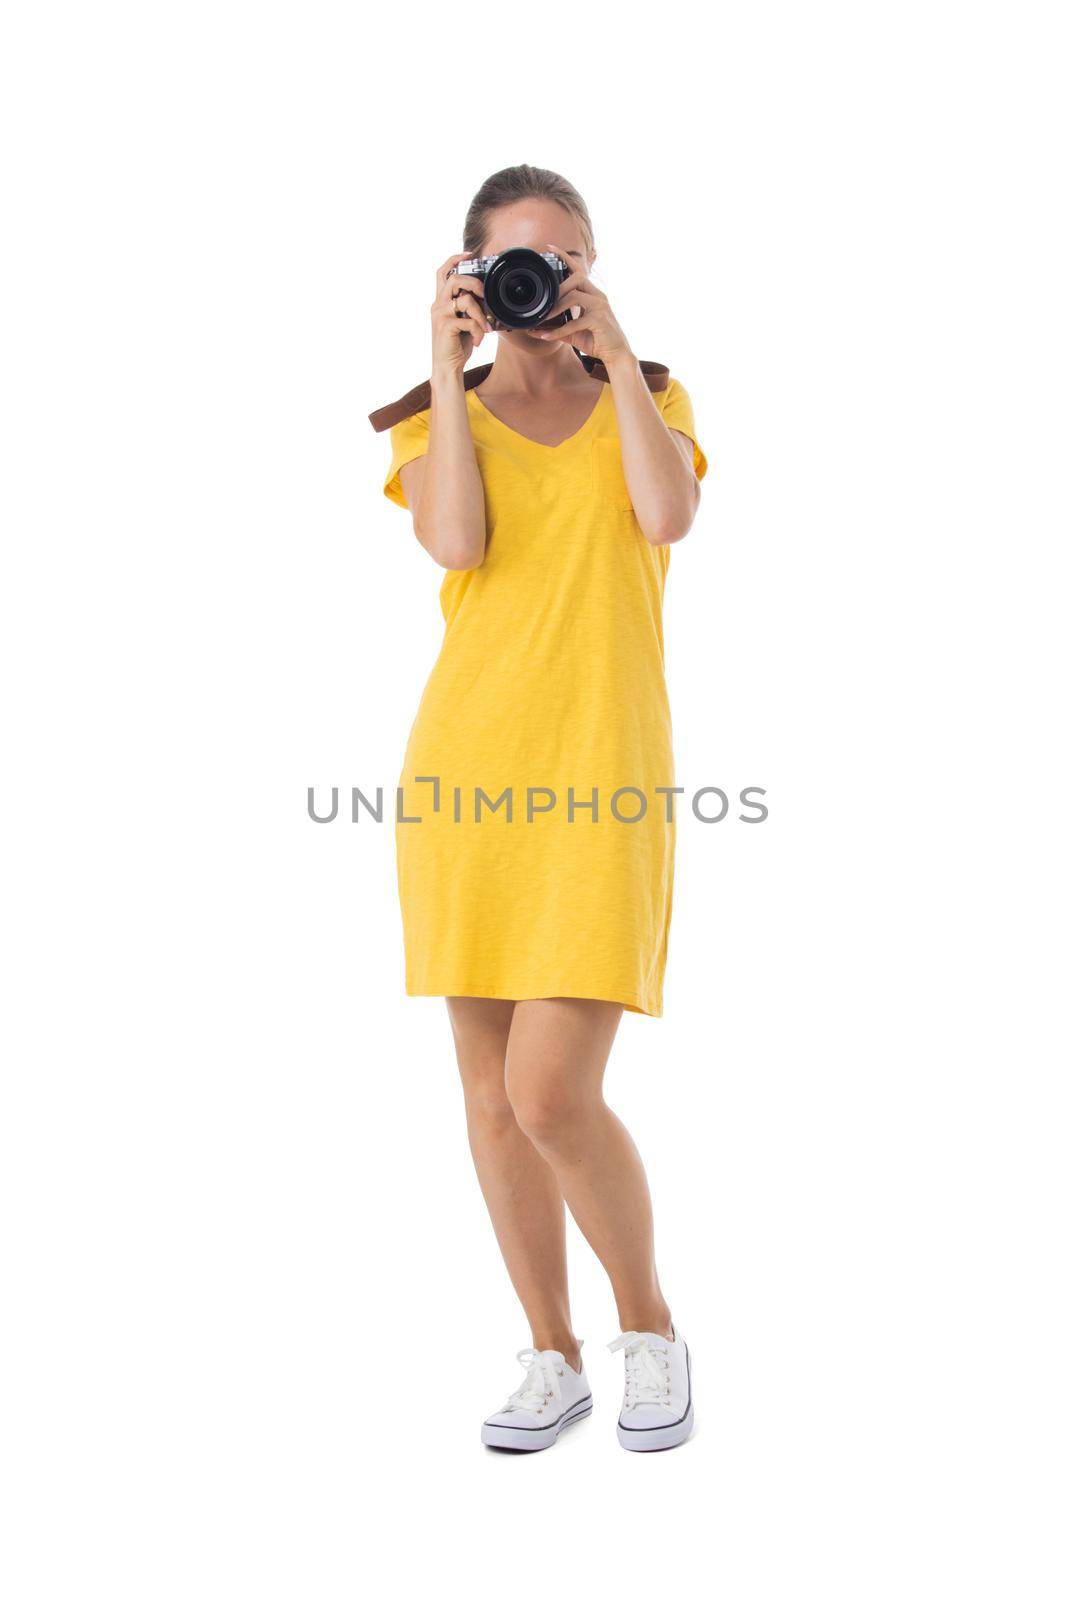 Girl with camera on white by ALotOfPeople